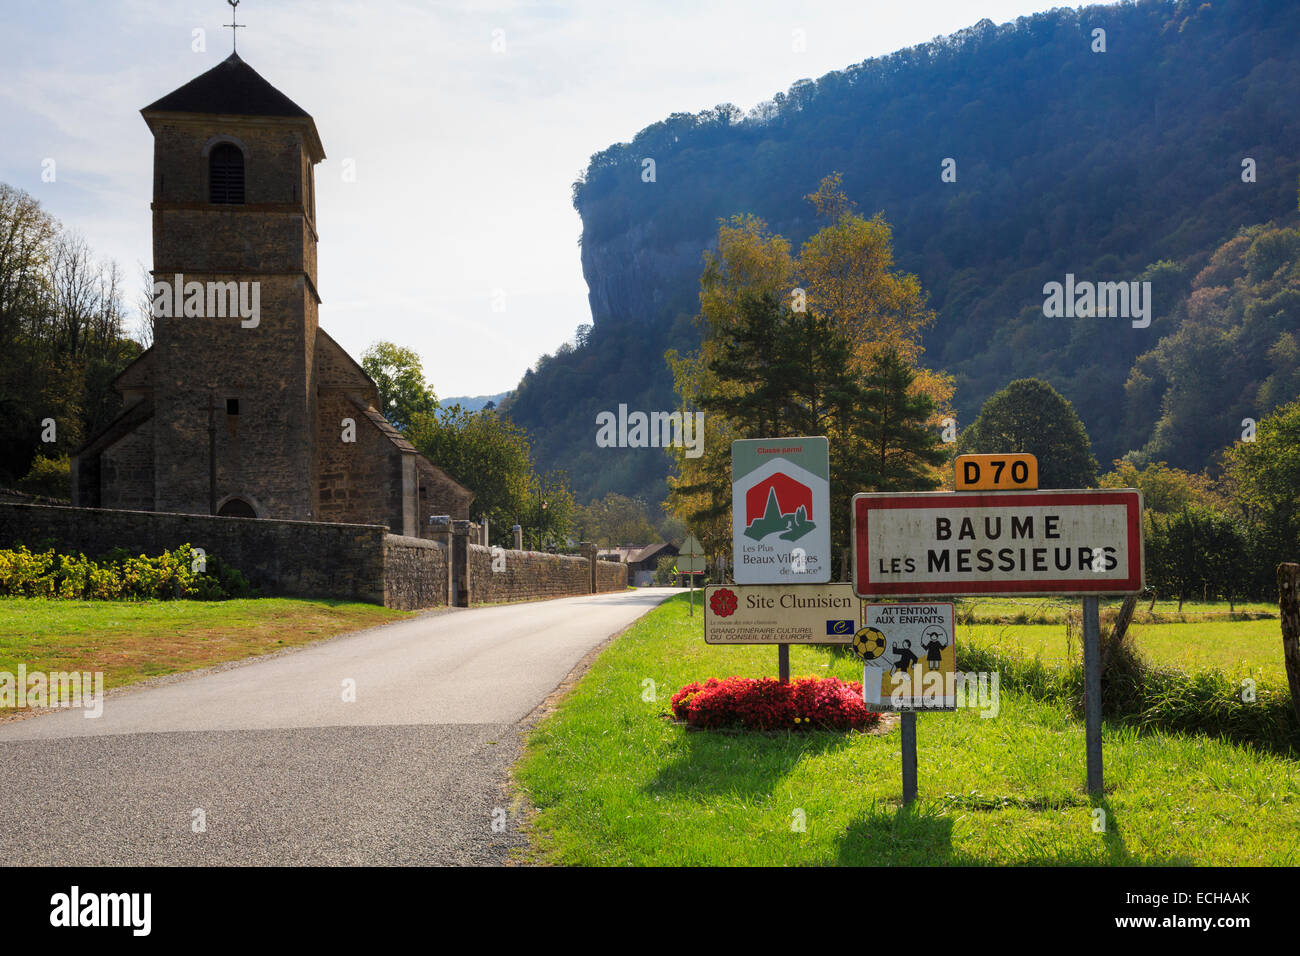 Village sign and church below escarpment in Jura mountains on D70 road. Baume-les-Messieurs, Jura, Franche-Comte, France, Europe Stock Photo